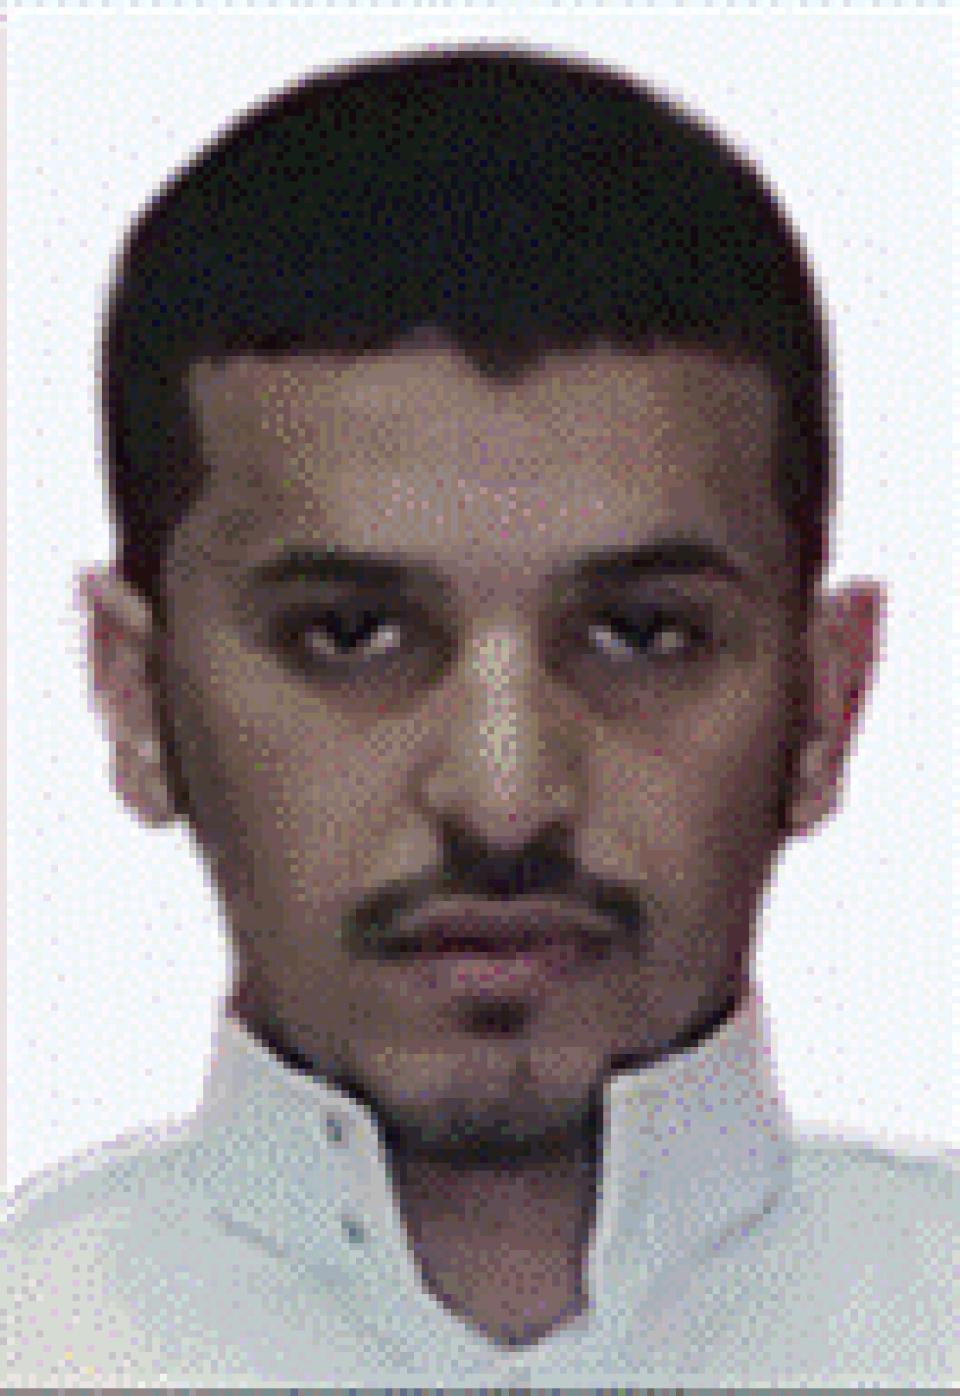 Al-Asiri is AQAP's chief bomb-maker, responsible for building the underwear bomb used to try to bring down a Detroit-bound jetliner on Christmas in 2009 and the printer-cartridge bombs intercepted in U.S.-bound cargo planes a year later. U.S. intelligence officials say he has resurfaced recently in Yemen, after months in hiding.  <em>This undated file photo released by Saudi Arabia's Ministry of Interior on Sunday, Oct. 31, 2010, purports to show Ibrahim Hassan al-Asiri. (AP Photo/Saudi Arabia Ministry of Interior, File)</em>